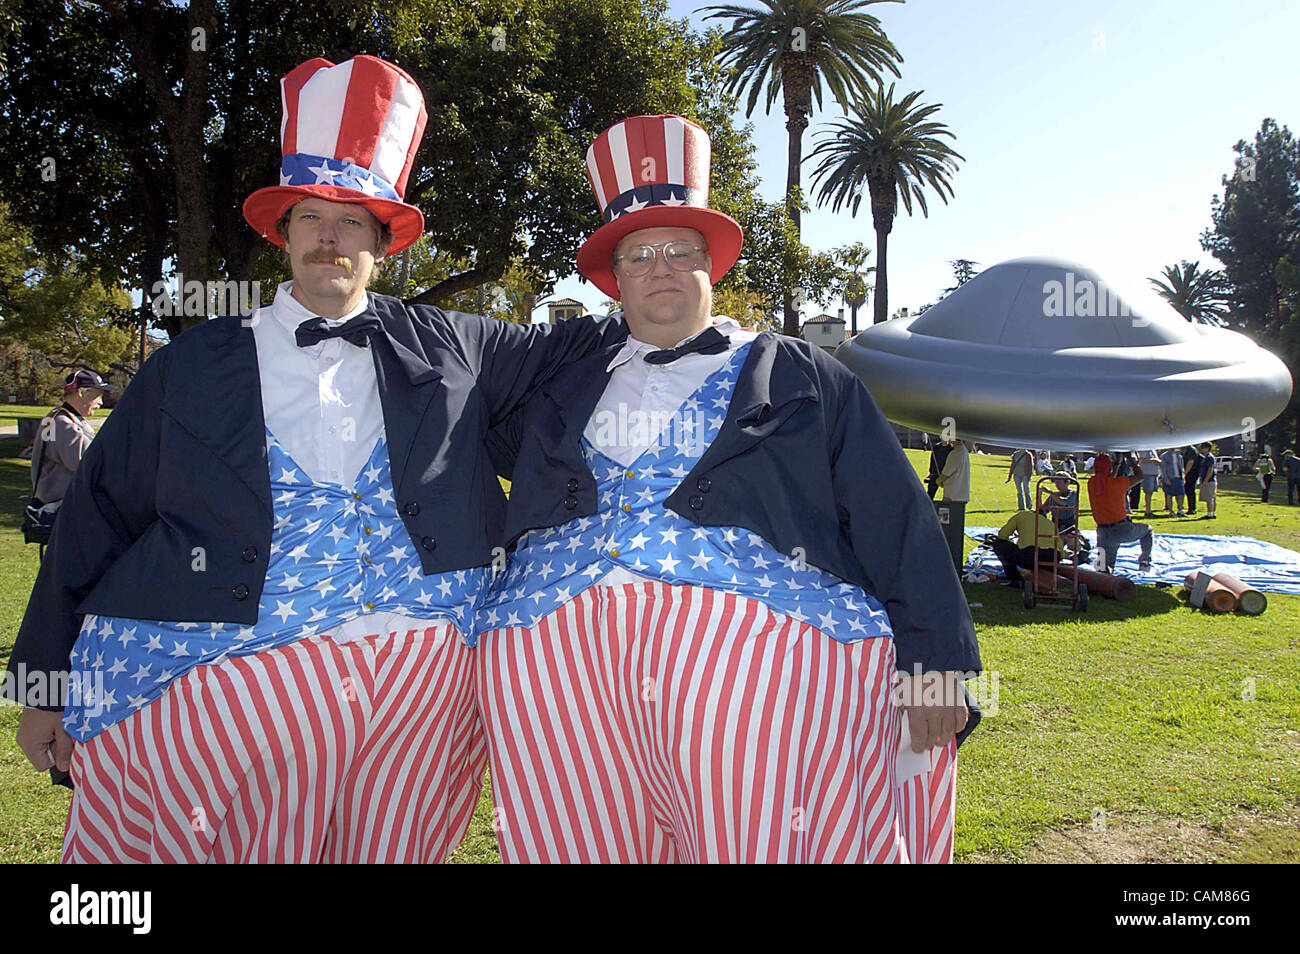 Nov. 23, 2003 - Pasadena, USA - John Ballard (right) and Fritz Ward (left) are dressed as hale and hearty Uncle Sams for the annual Dooh Dah Parade in Pasadena, California. Behind them, being filled by hot air, is a flying saucer from the Raelians, the group that last year claimed to have cloned the Stock Photo